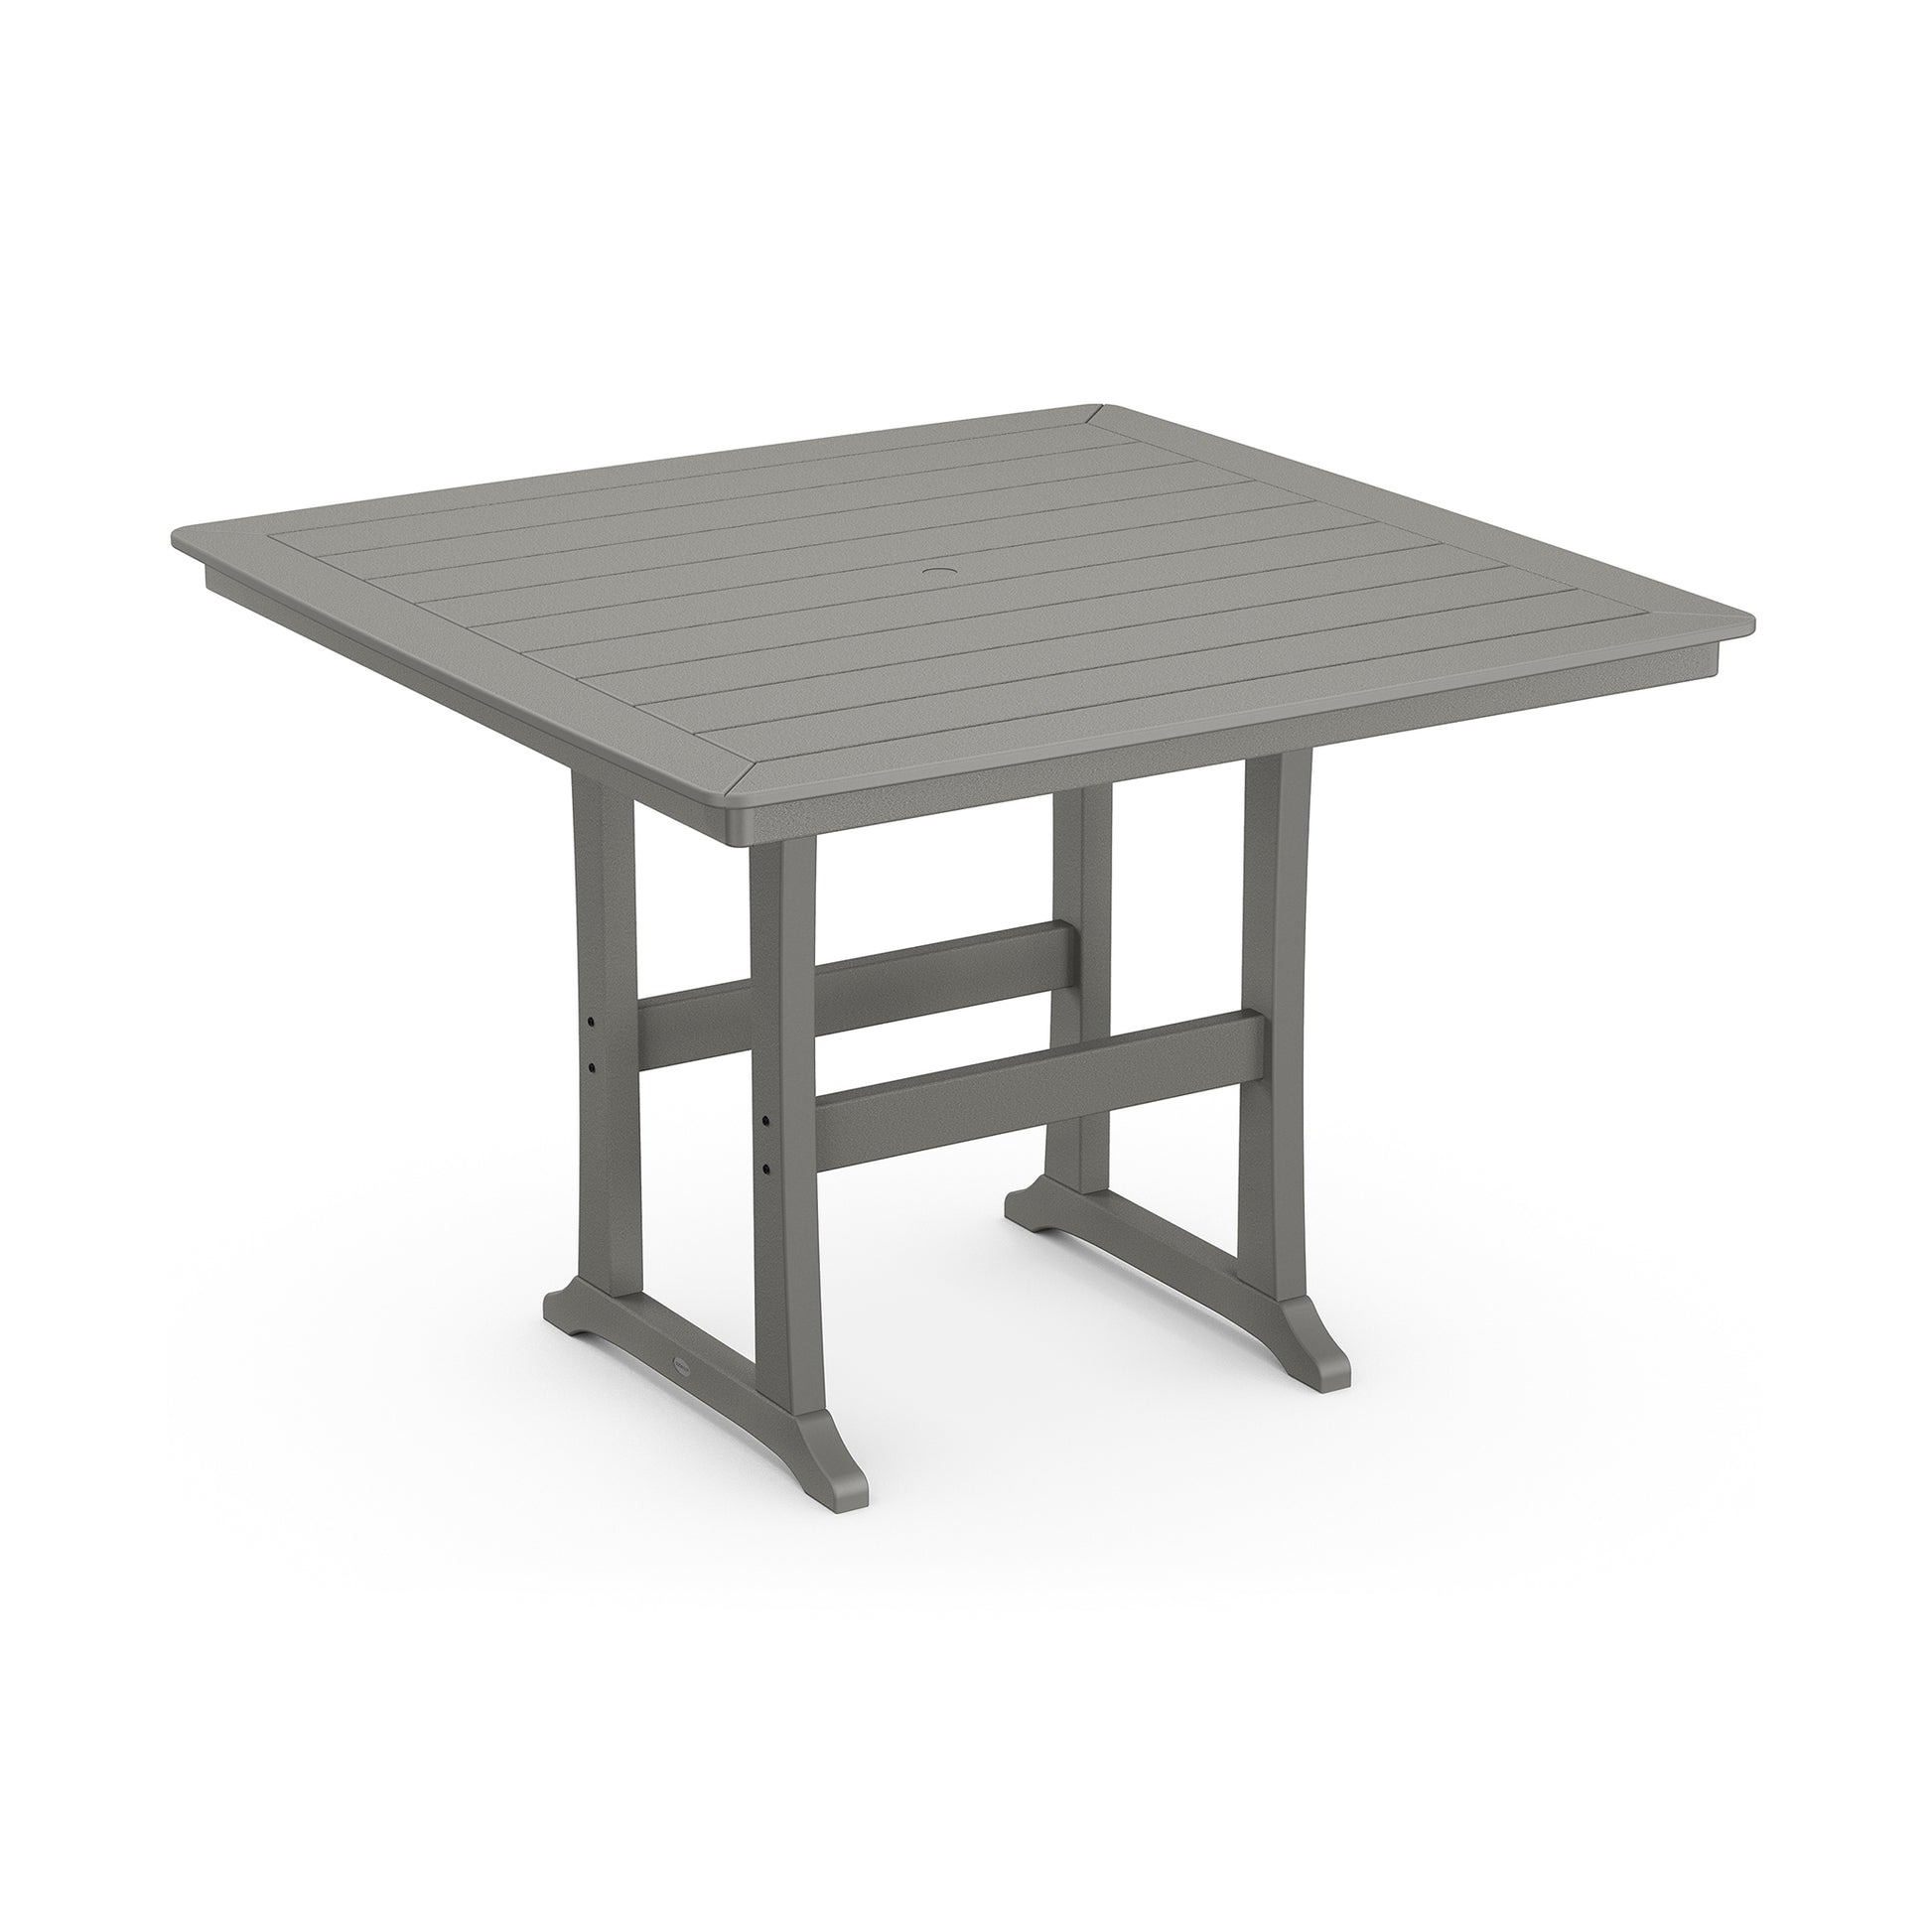 A square, gray, POLYWOOD® Nautical Trestle 59" Bar Table with slatted top and sturdy legs, isolated on a white background.